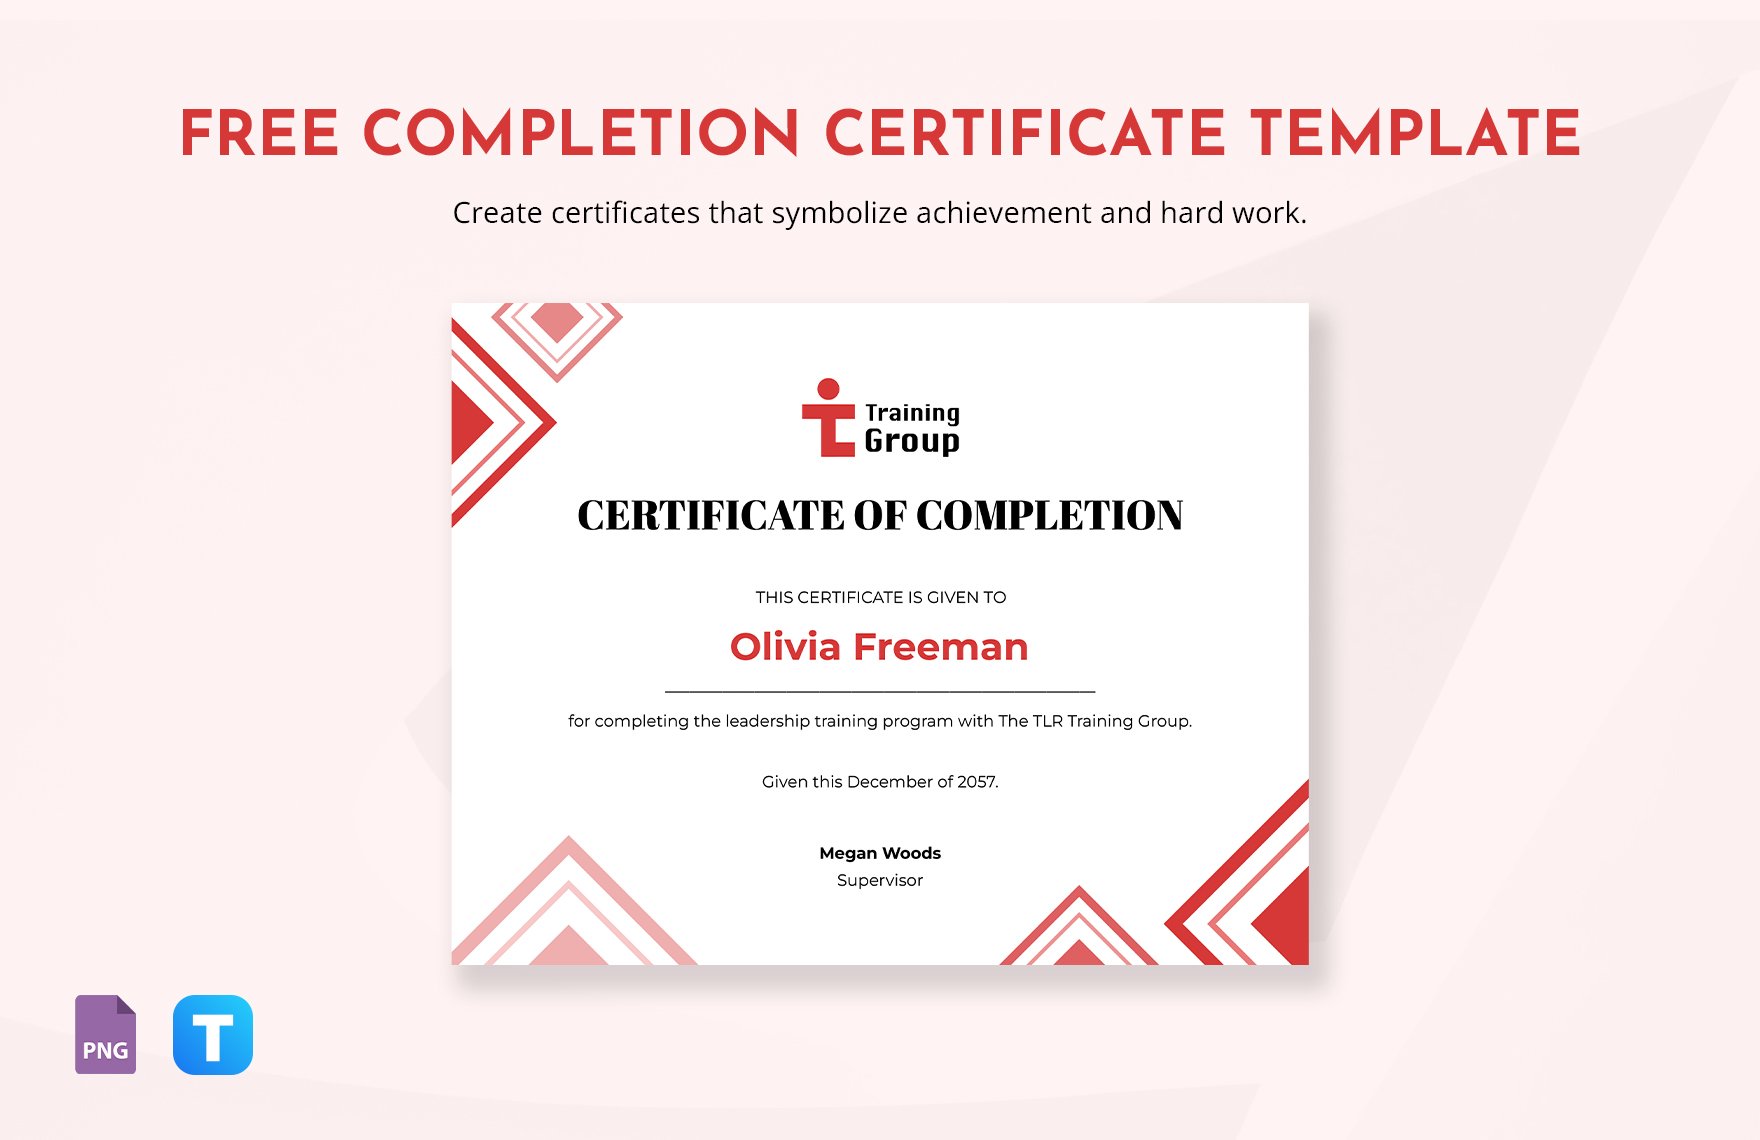 Free rFree Completion Certificate Template